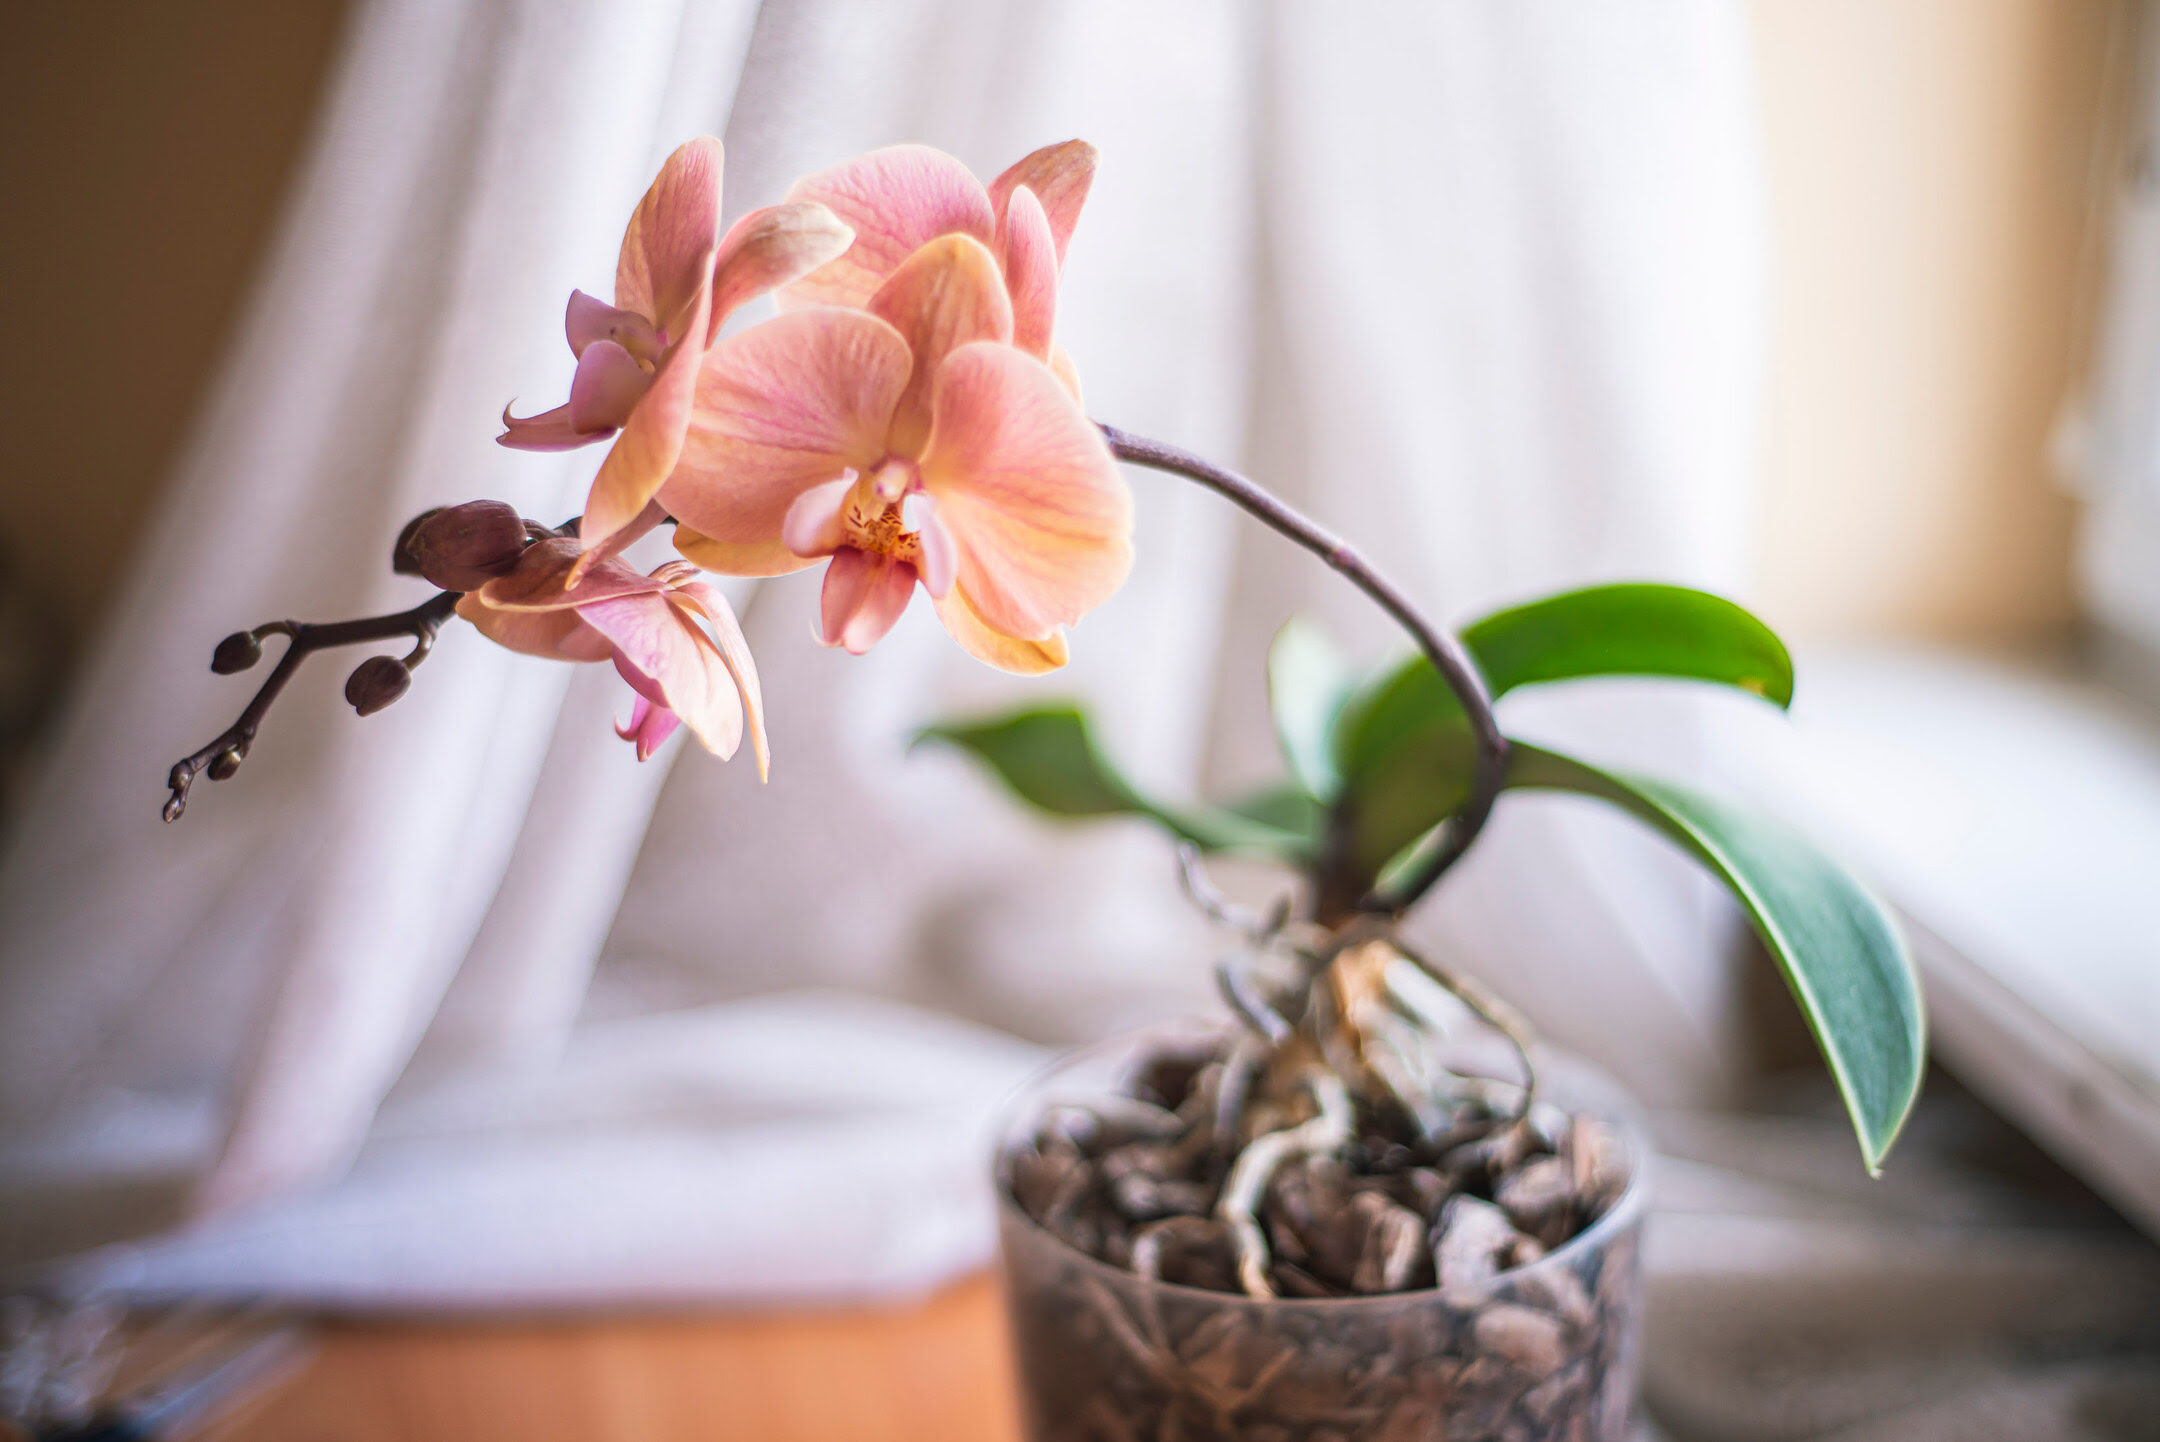 How To Grow Orchids From Seed Without Agar